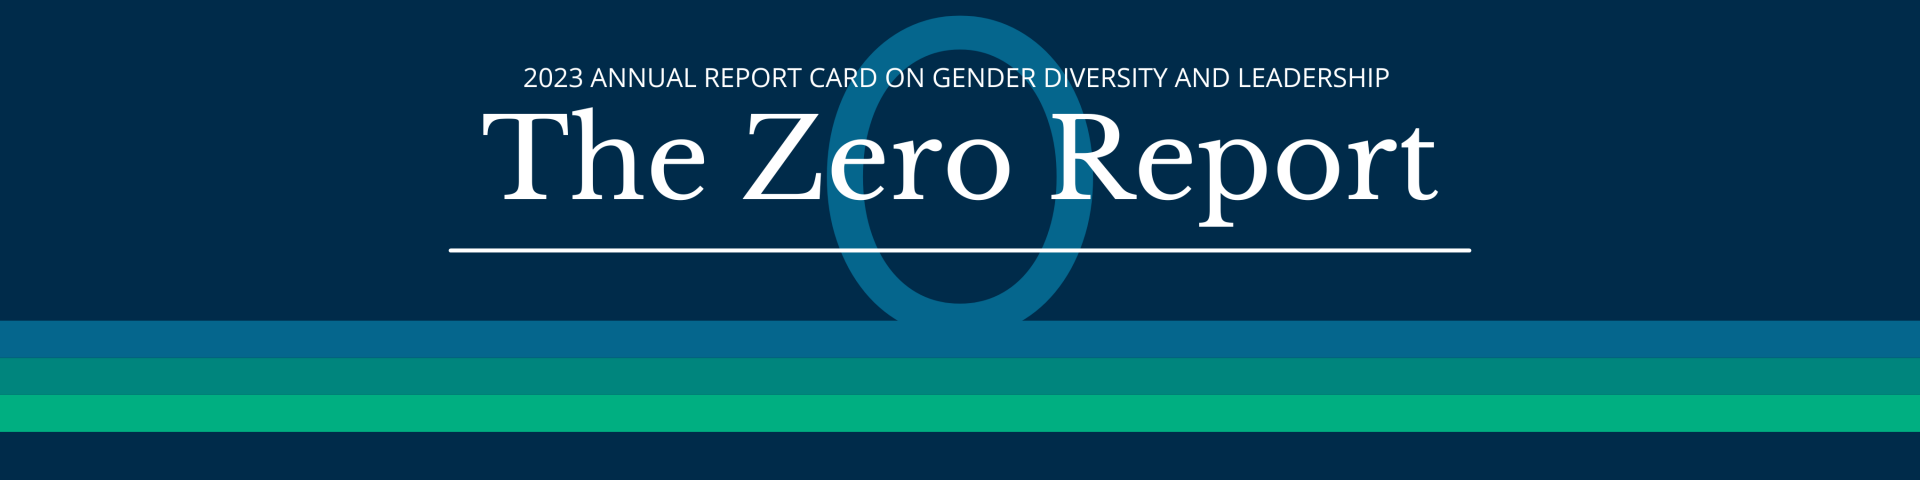 2023 Annual Report Card on Gender Diversity and Leadership: The Zero Report